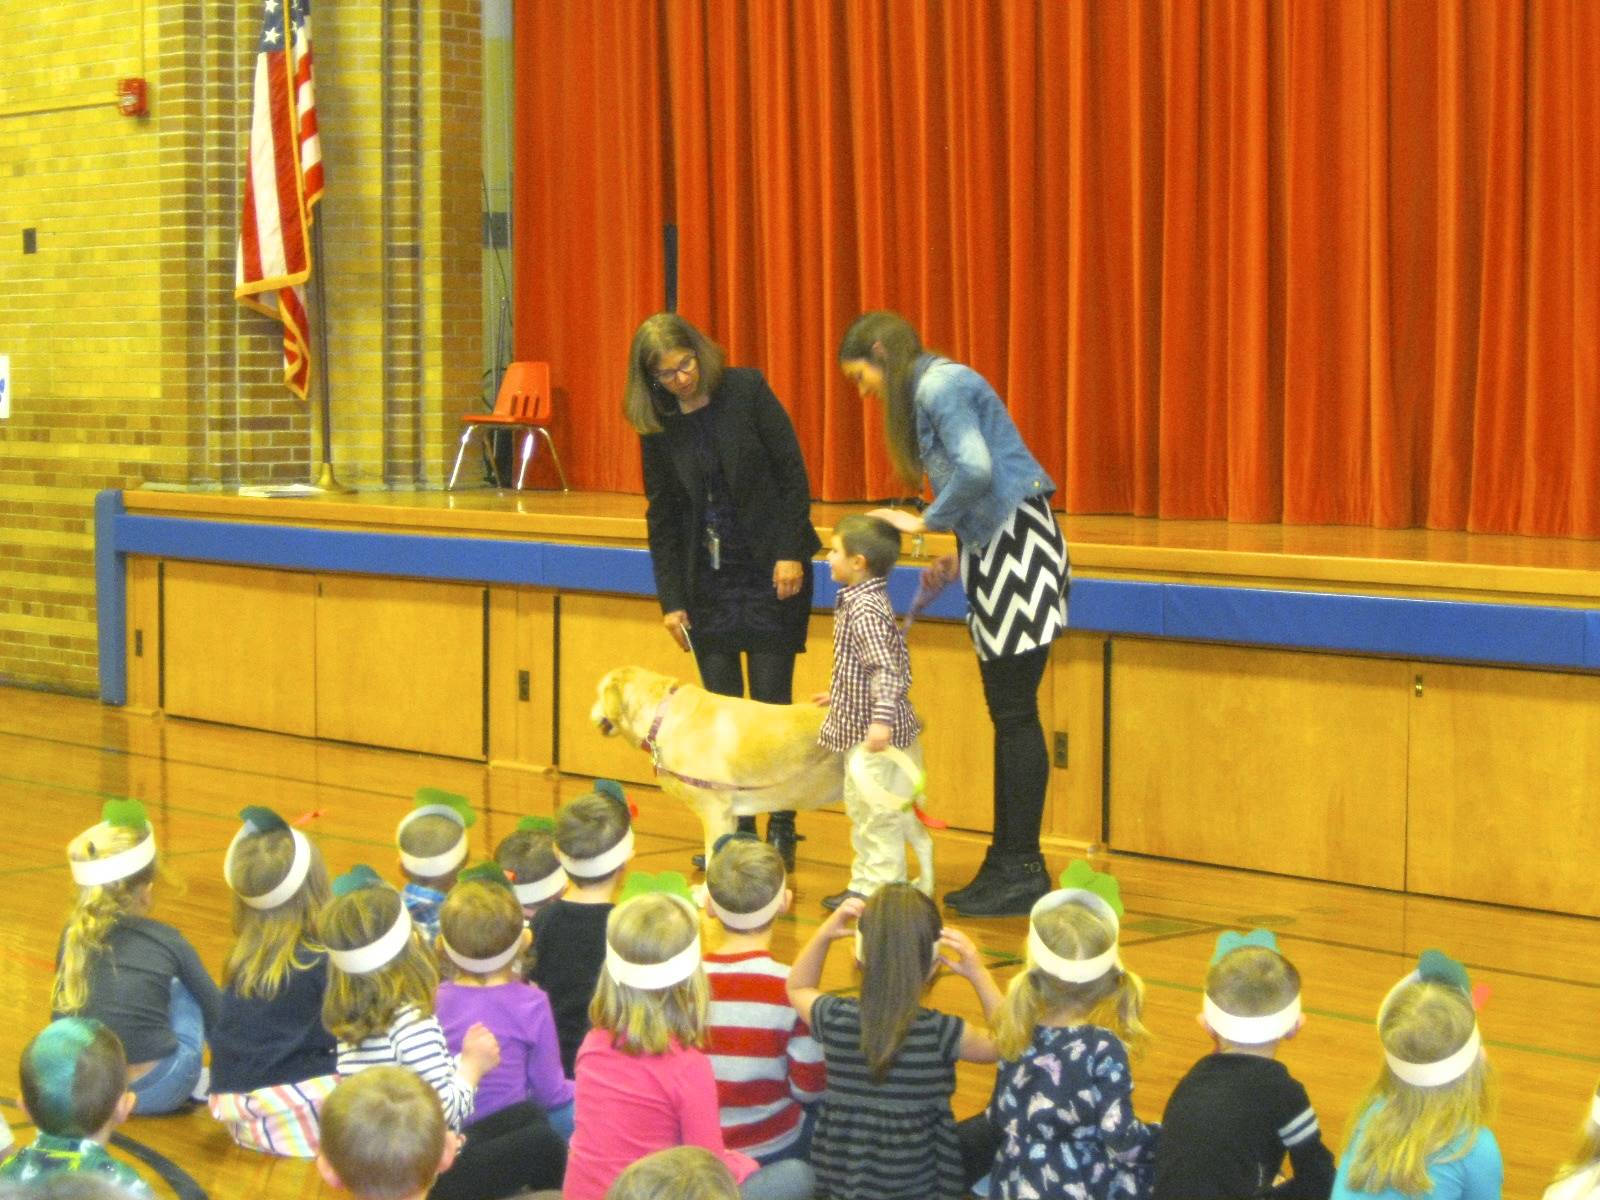 Therapy dog and owner visits Guilford.